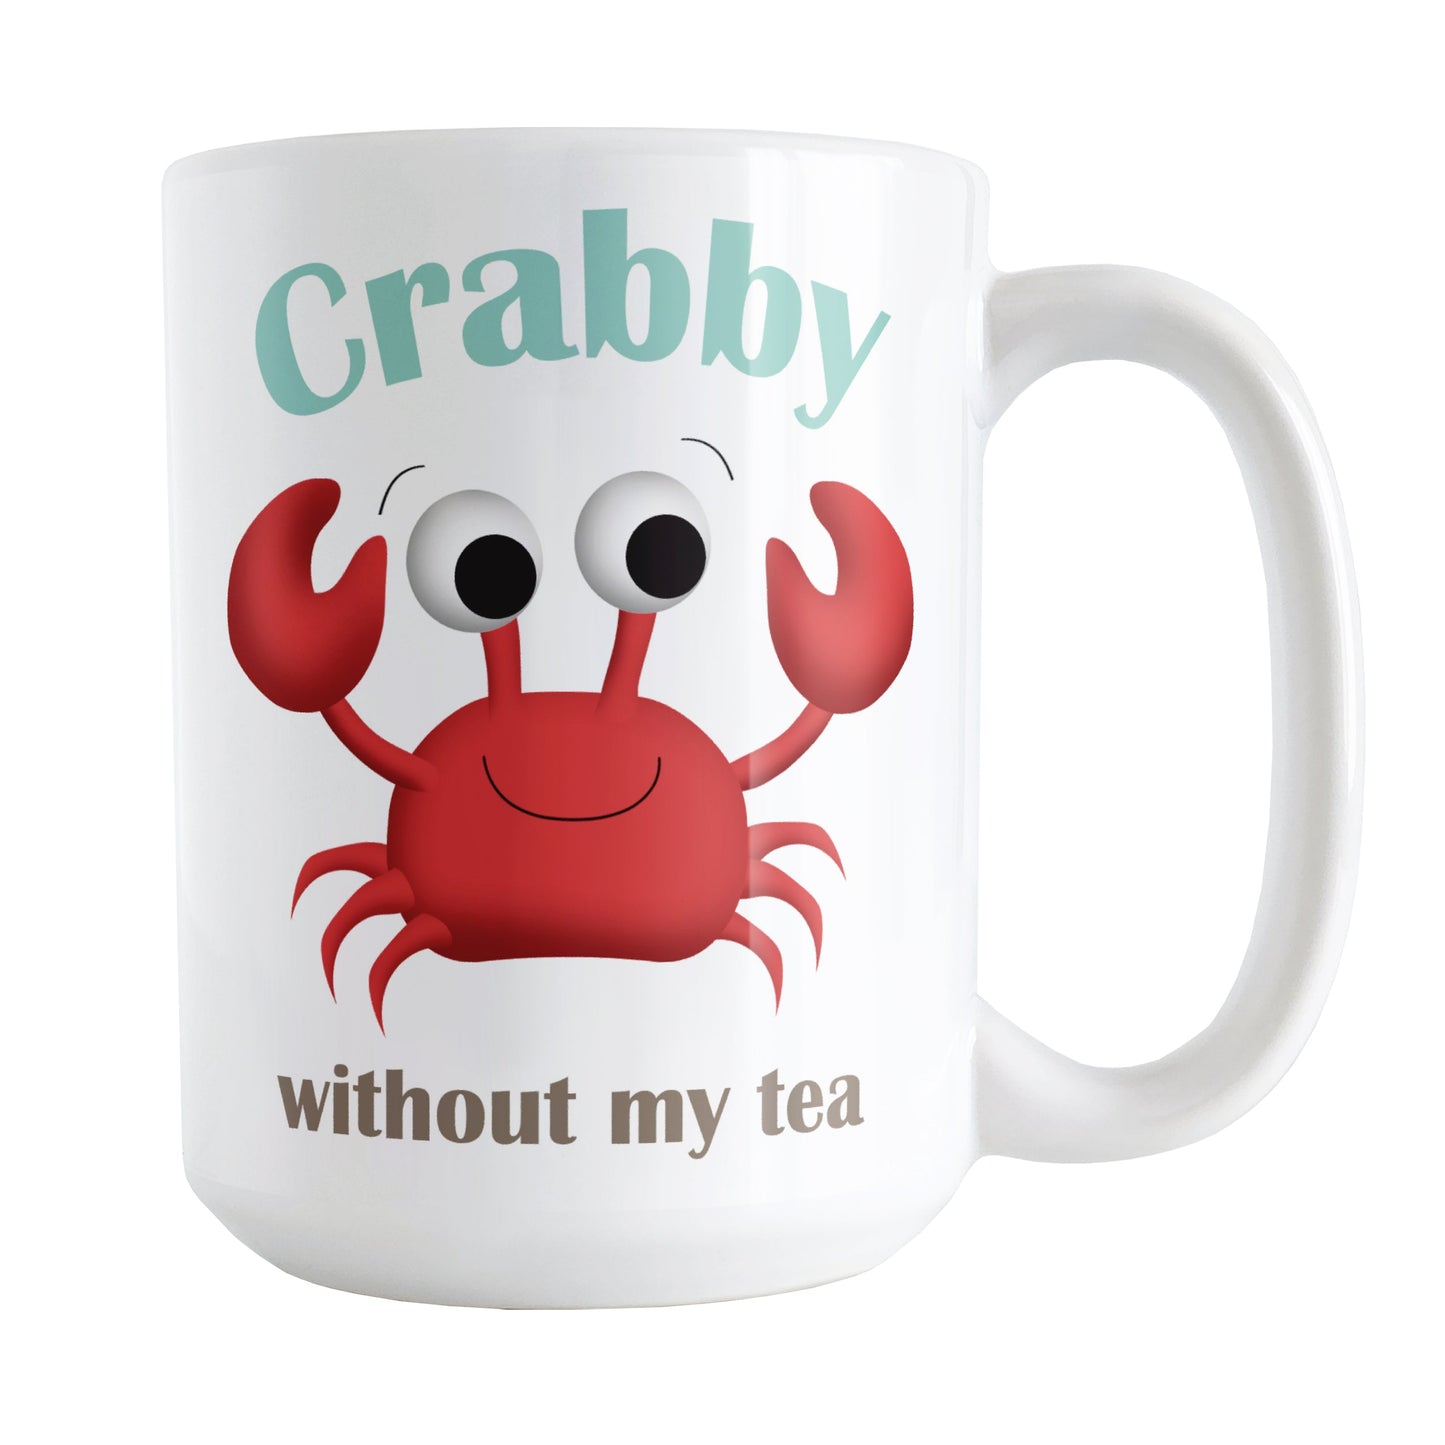 Crabby without my Tea - Cute Crab Mug (15oz) at Amy's Coffee Mugs